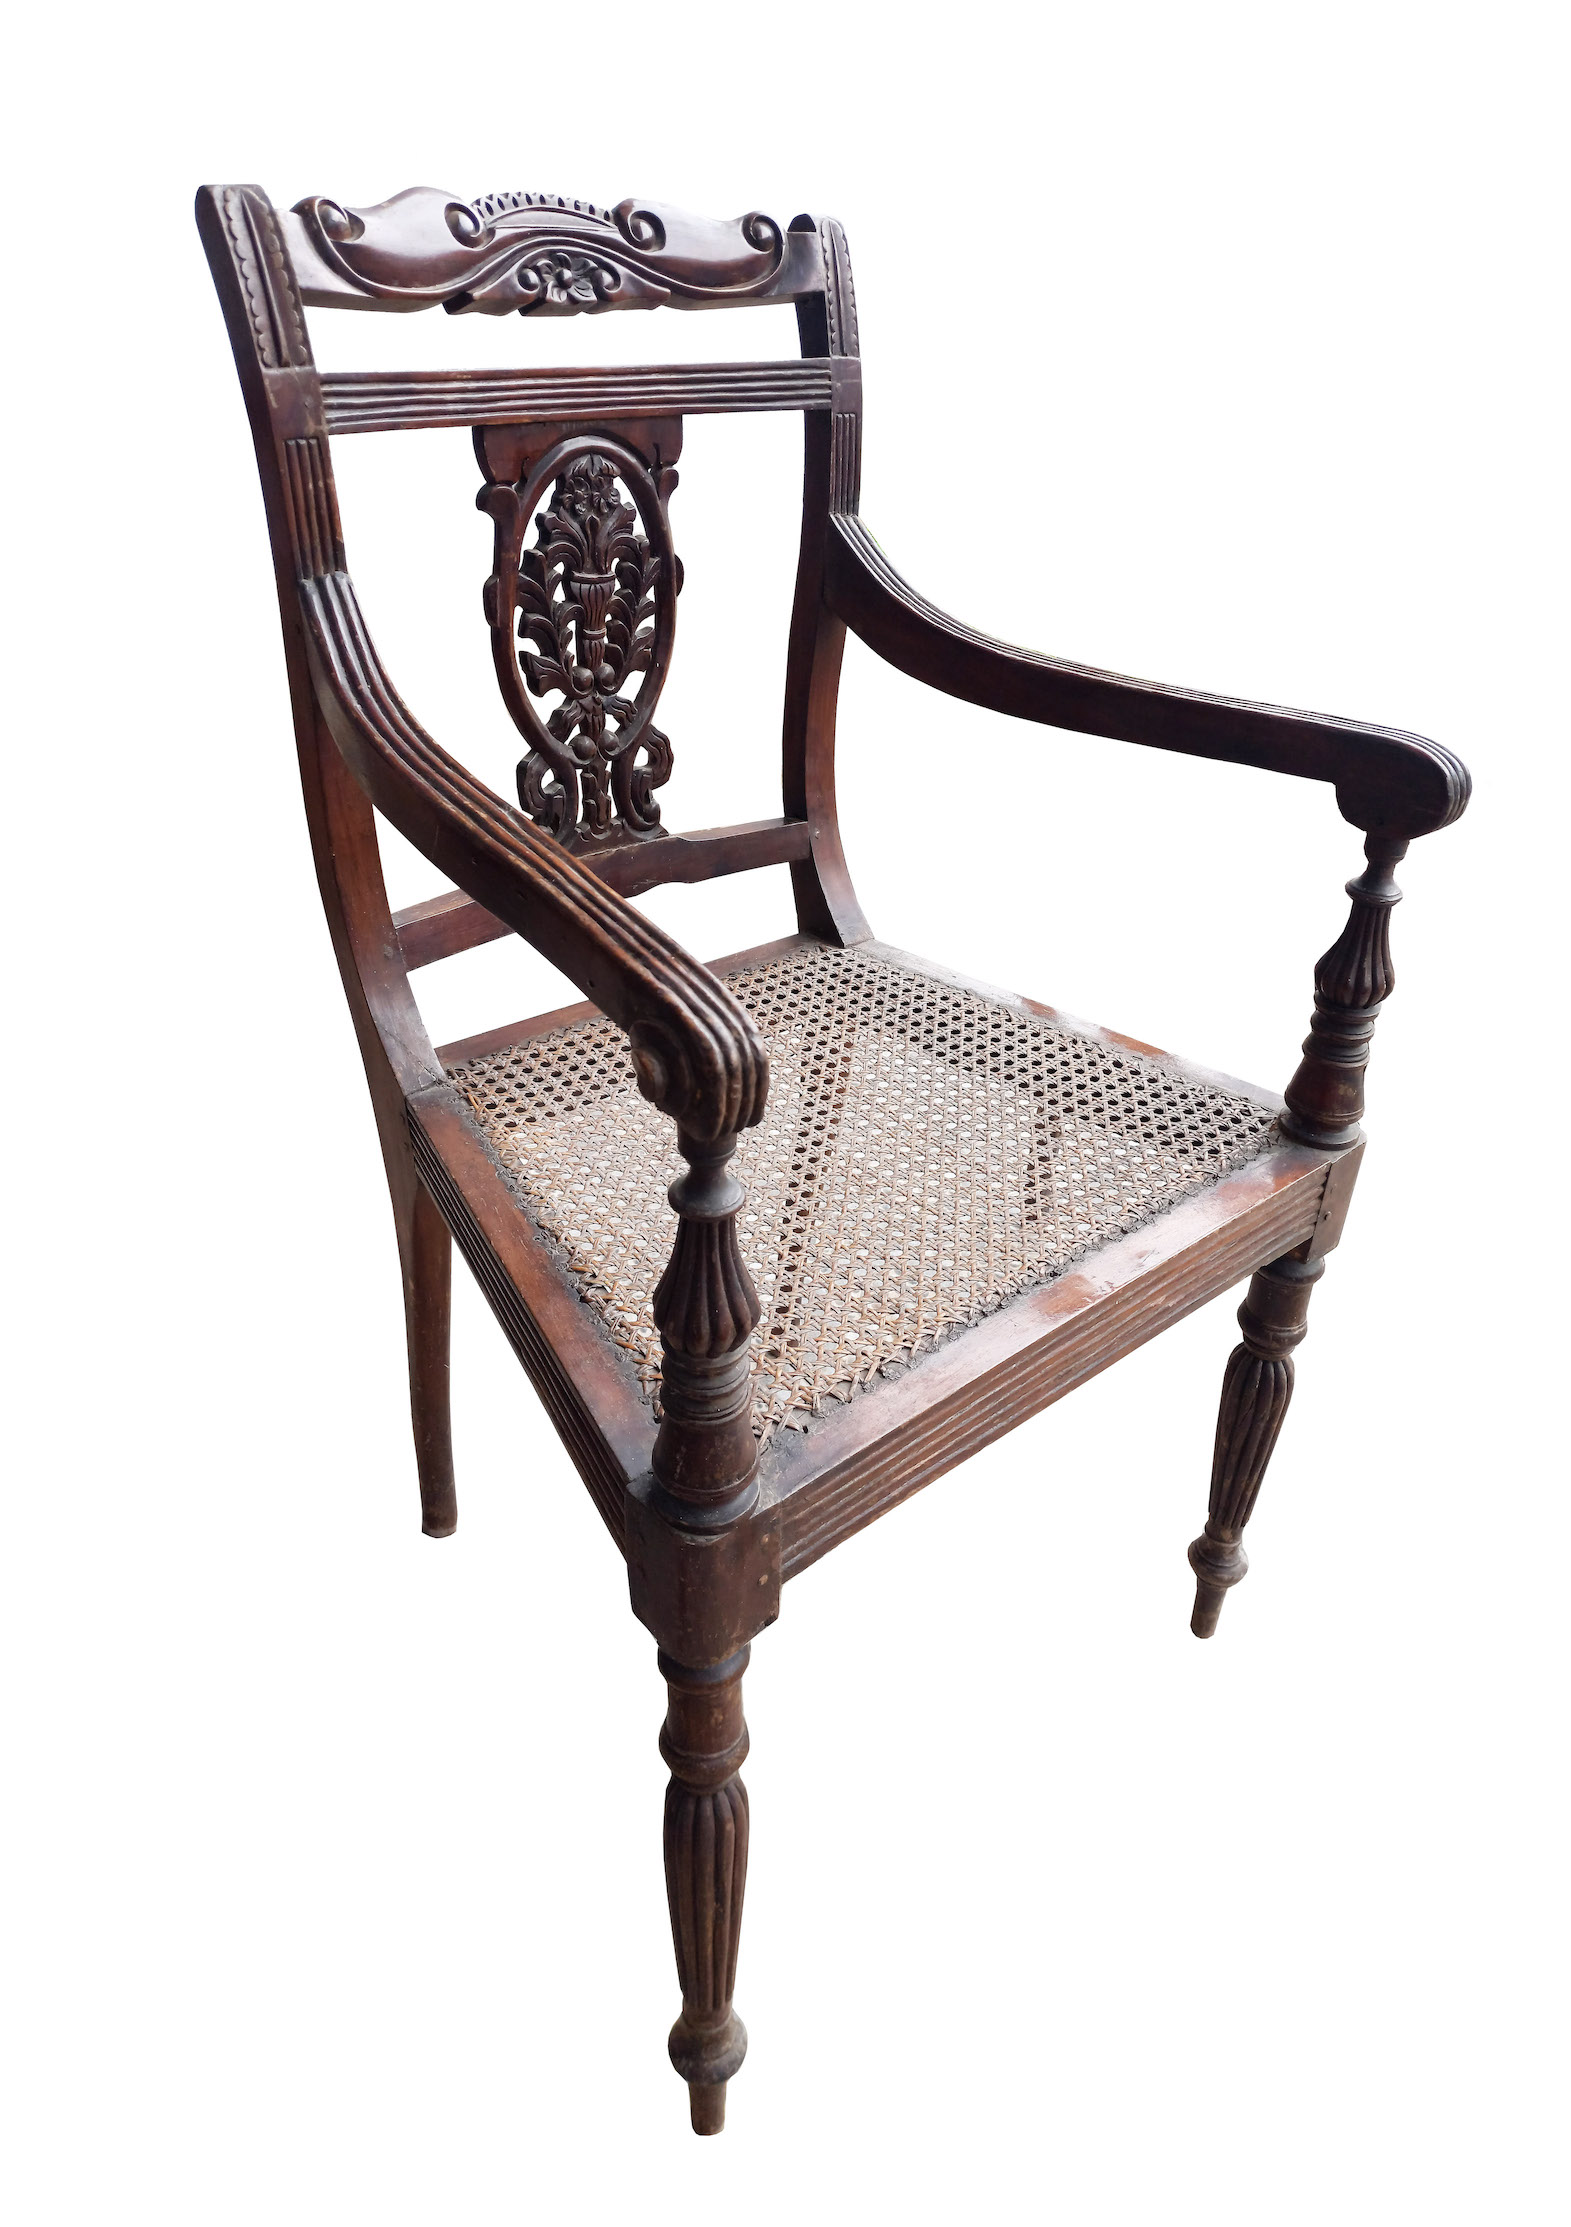 A set of three carved teak arm chairs with rattan seat